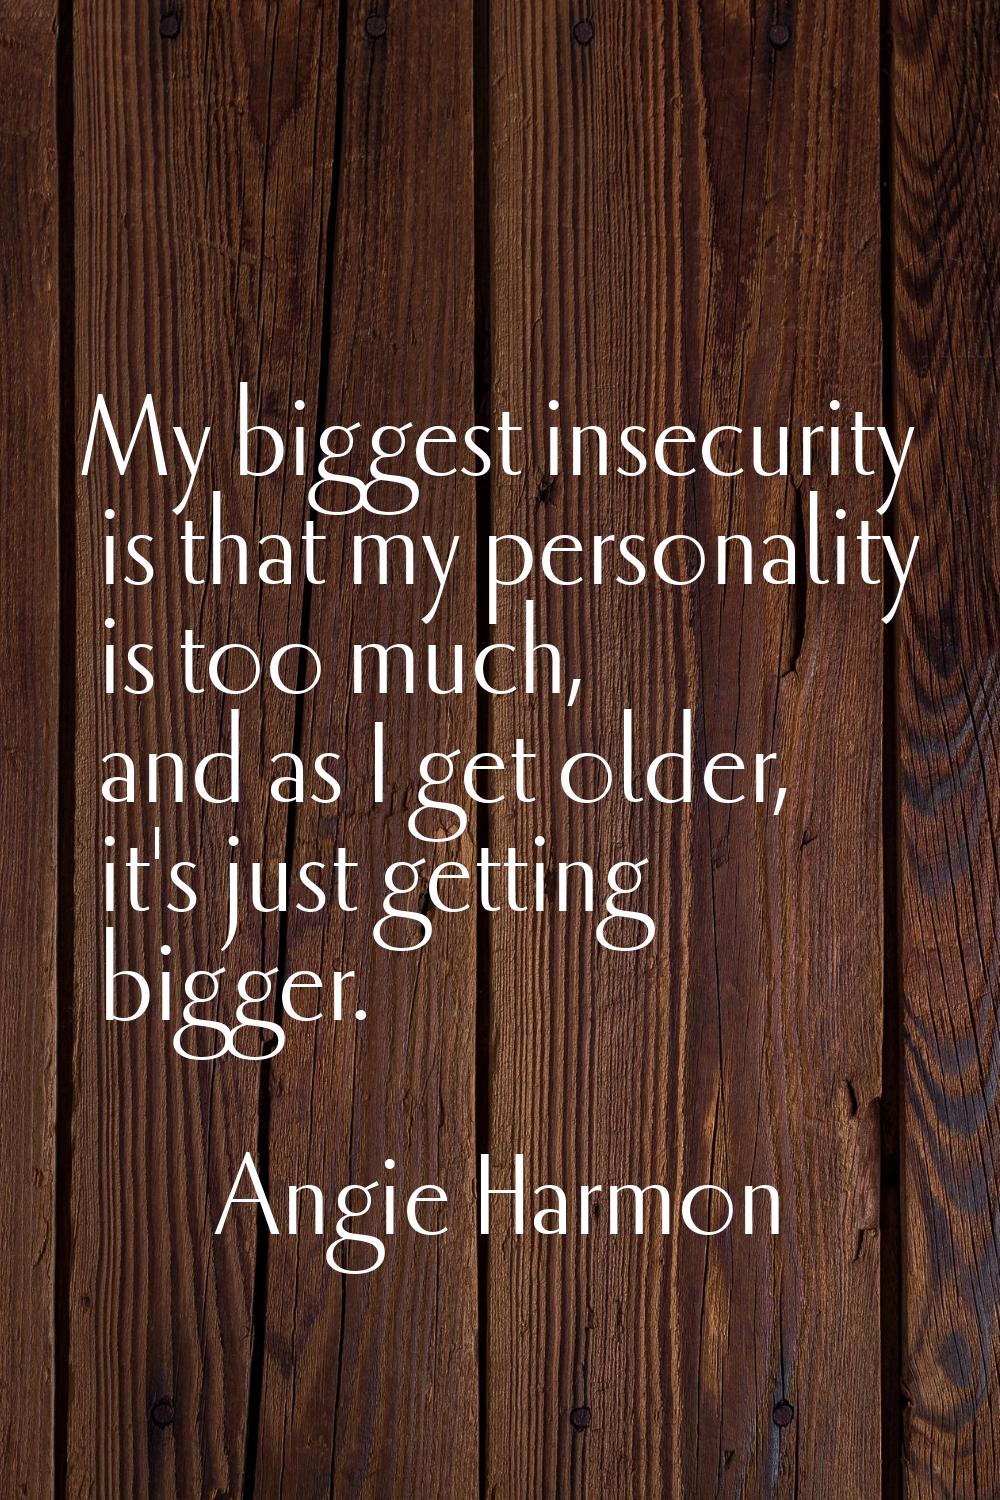 My biggest insecurity is that my personality is too much, and as I get older, it's just getting big